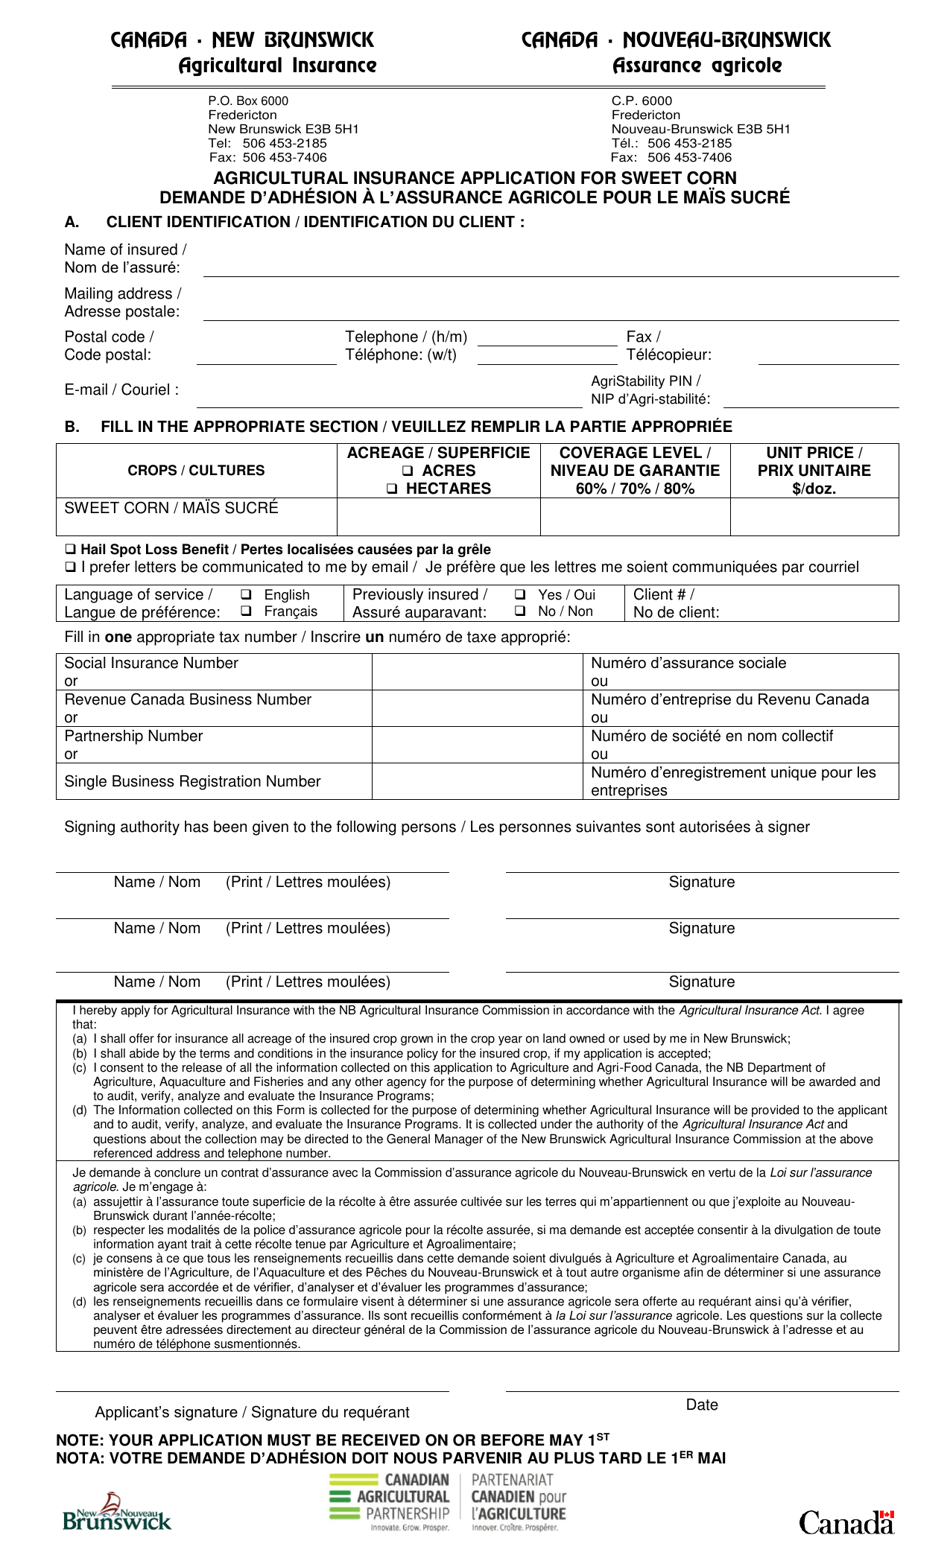 Agricultural Insurance Application for Sweet Corn - New Brunswick, Canada (English / French), Page 1